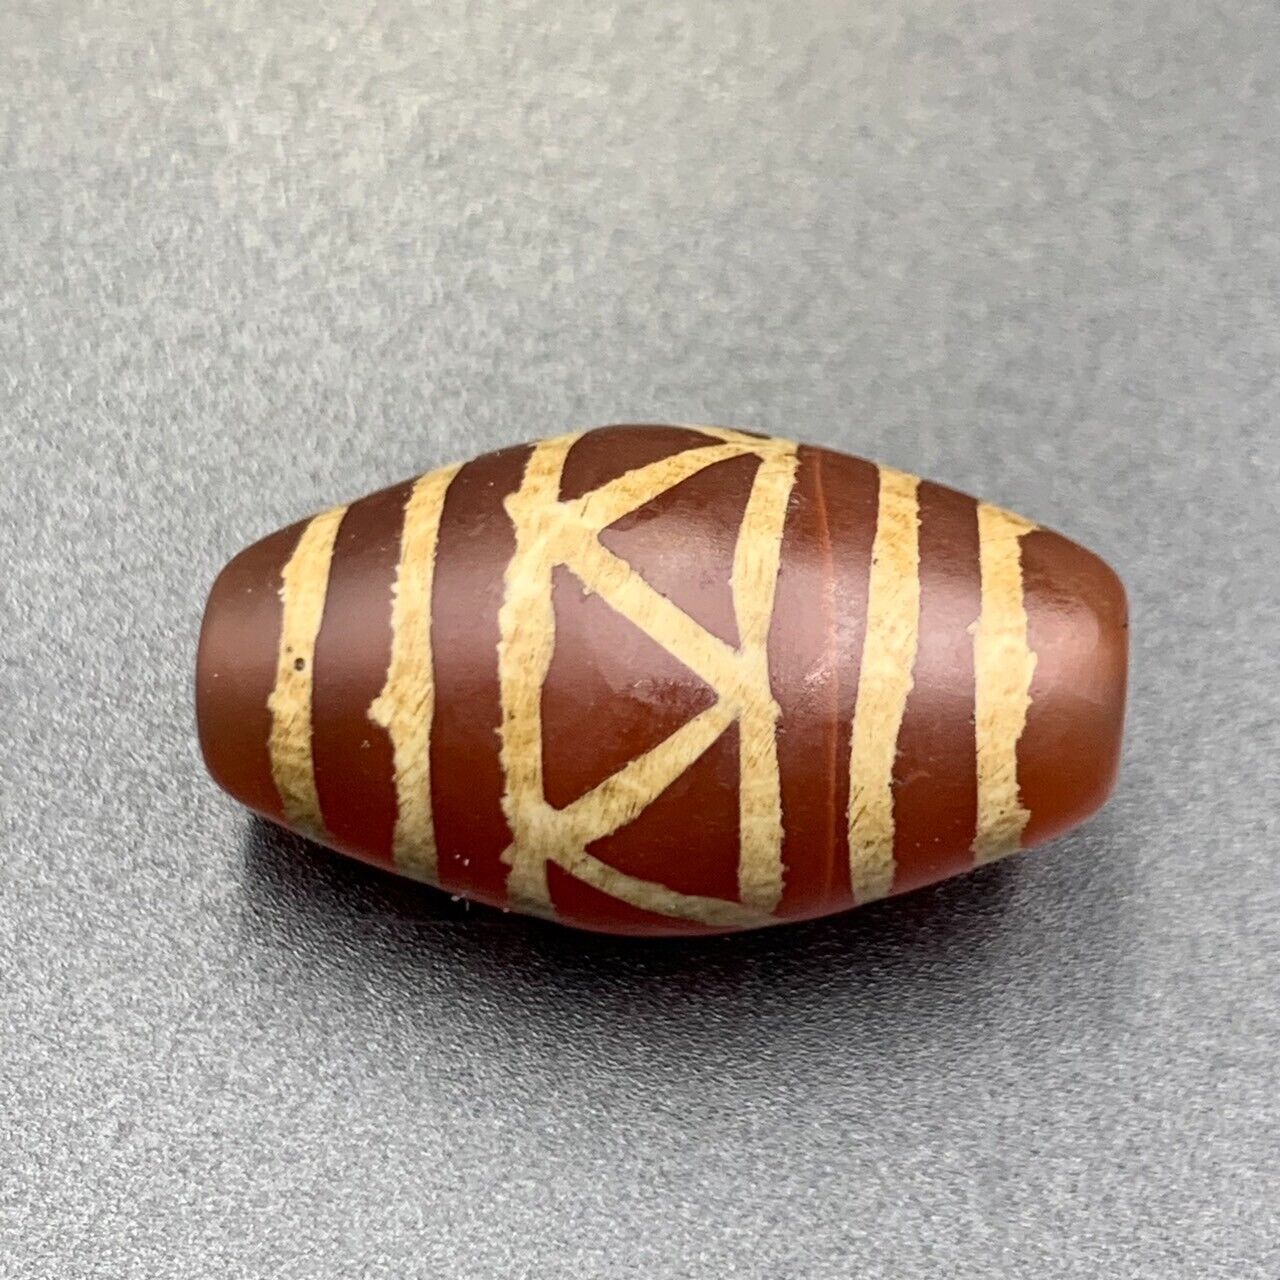 Awesome Antique Tibetan Etched Agate Bead, Himalayan Antique Etched Bead